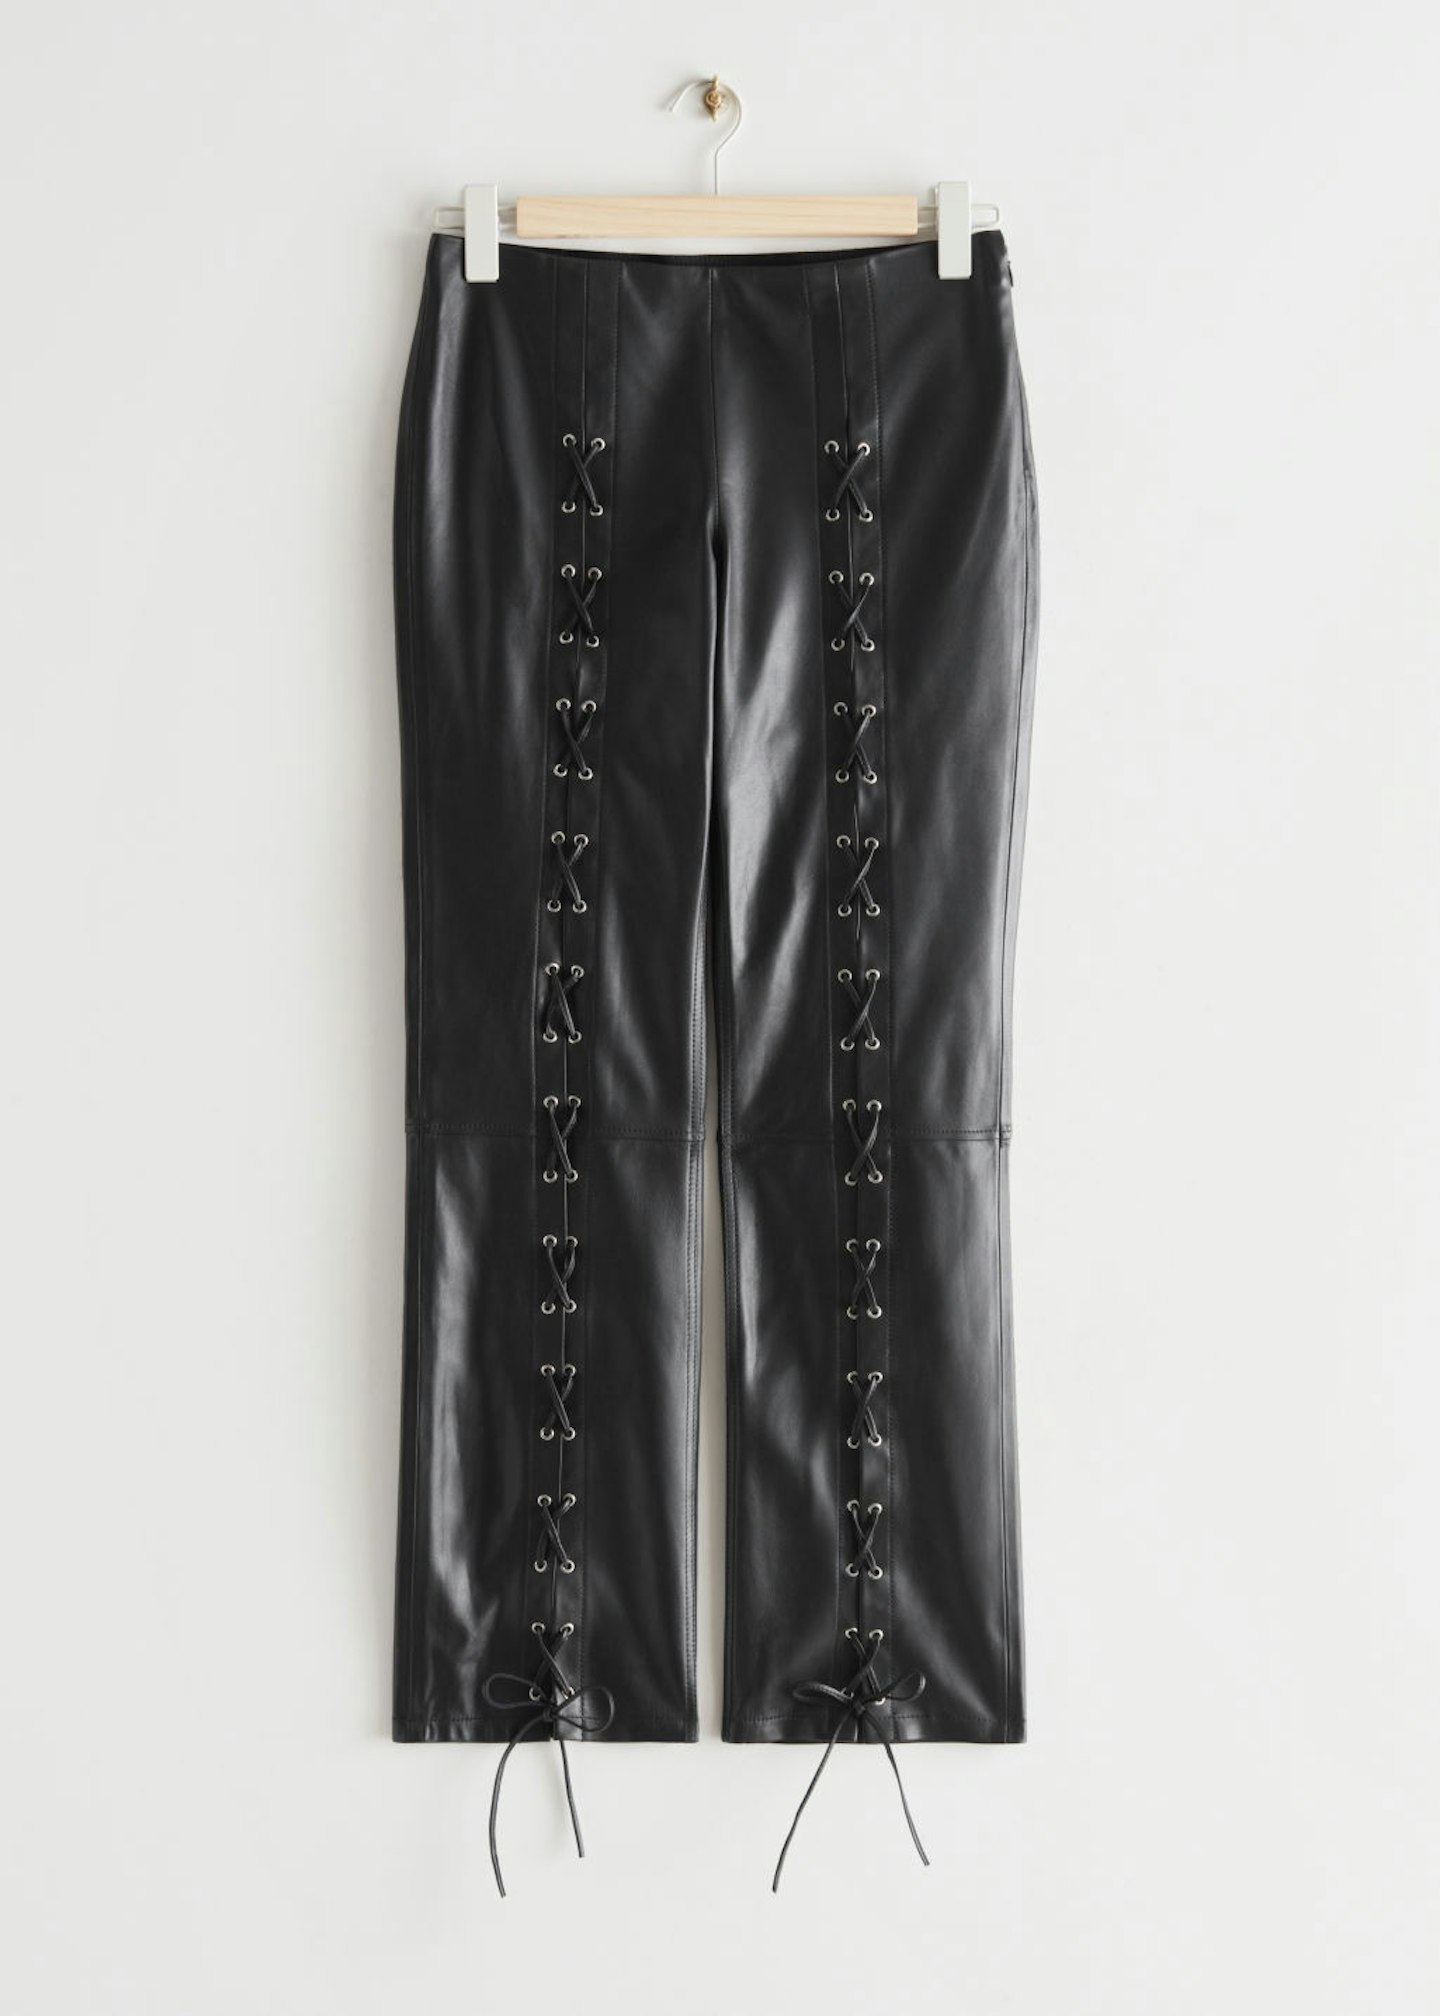 & Other Stories, Lace-Up Leather Trousers